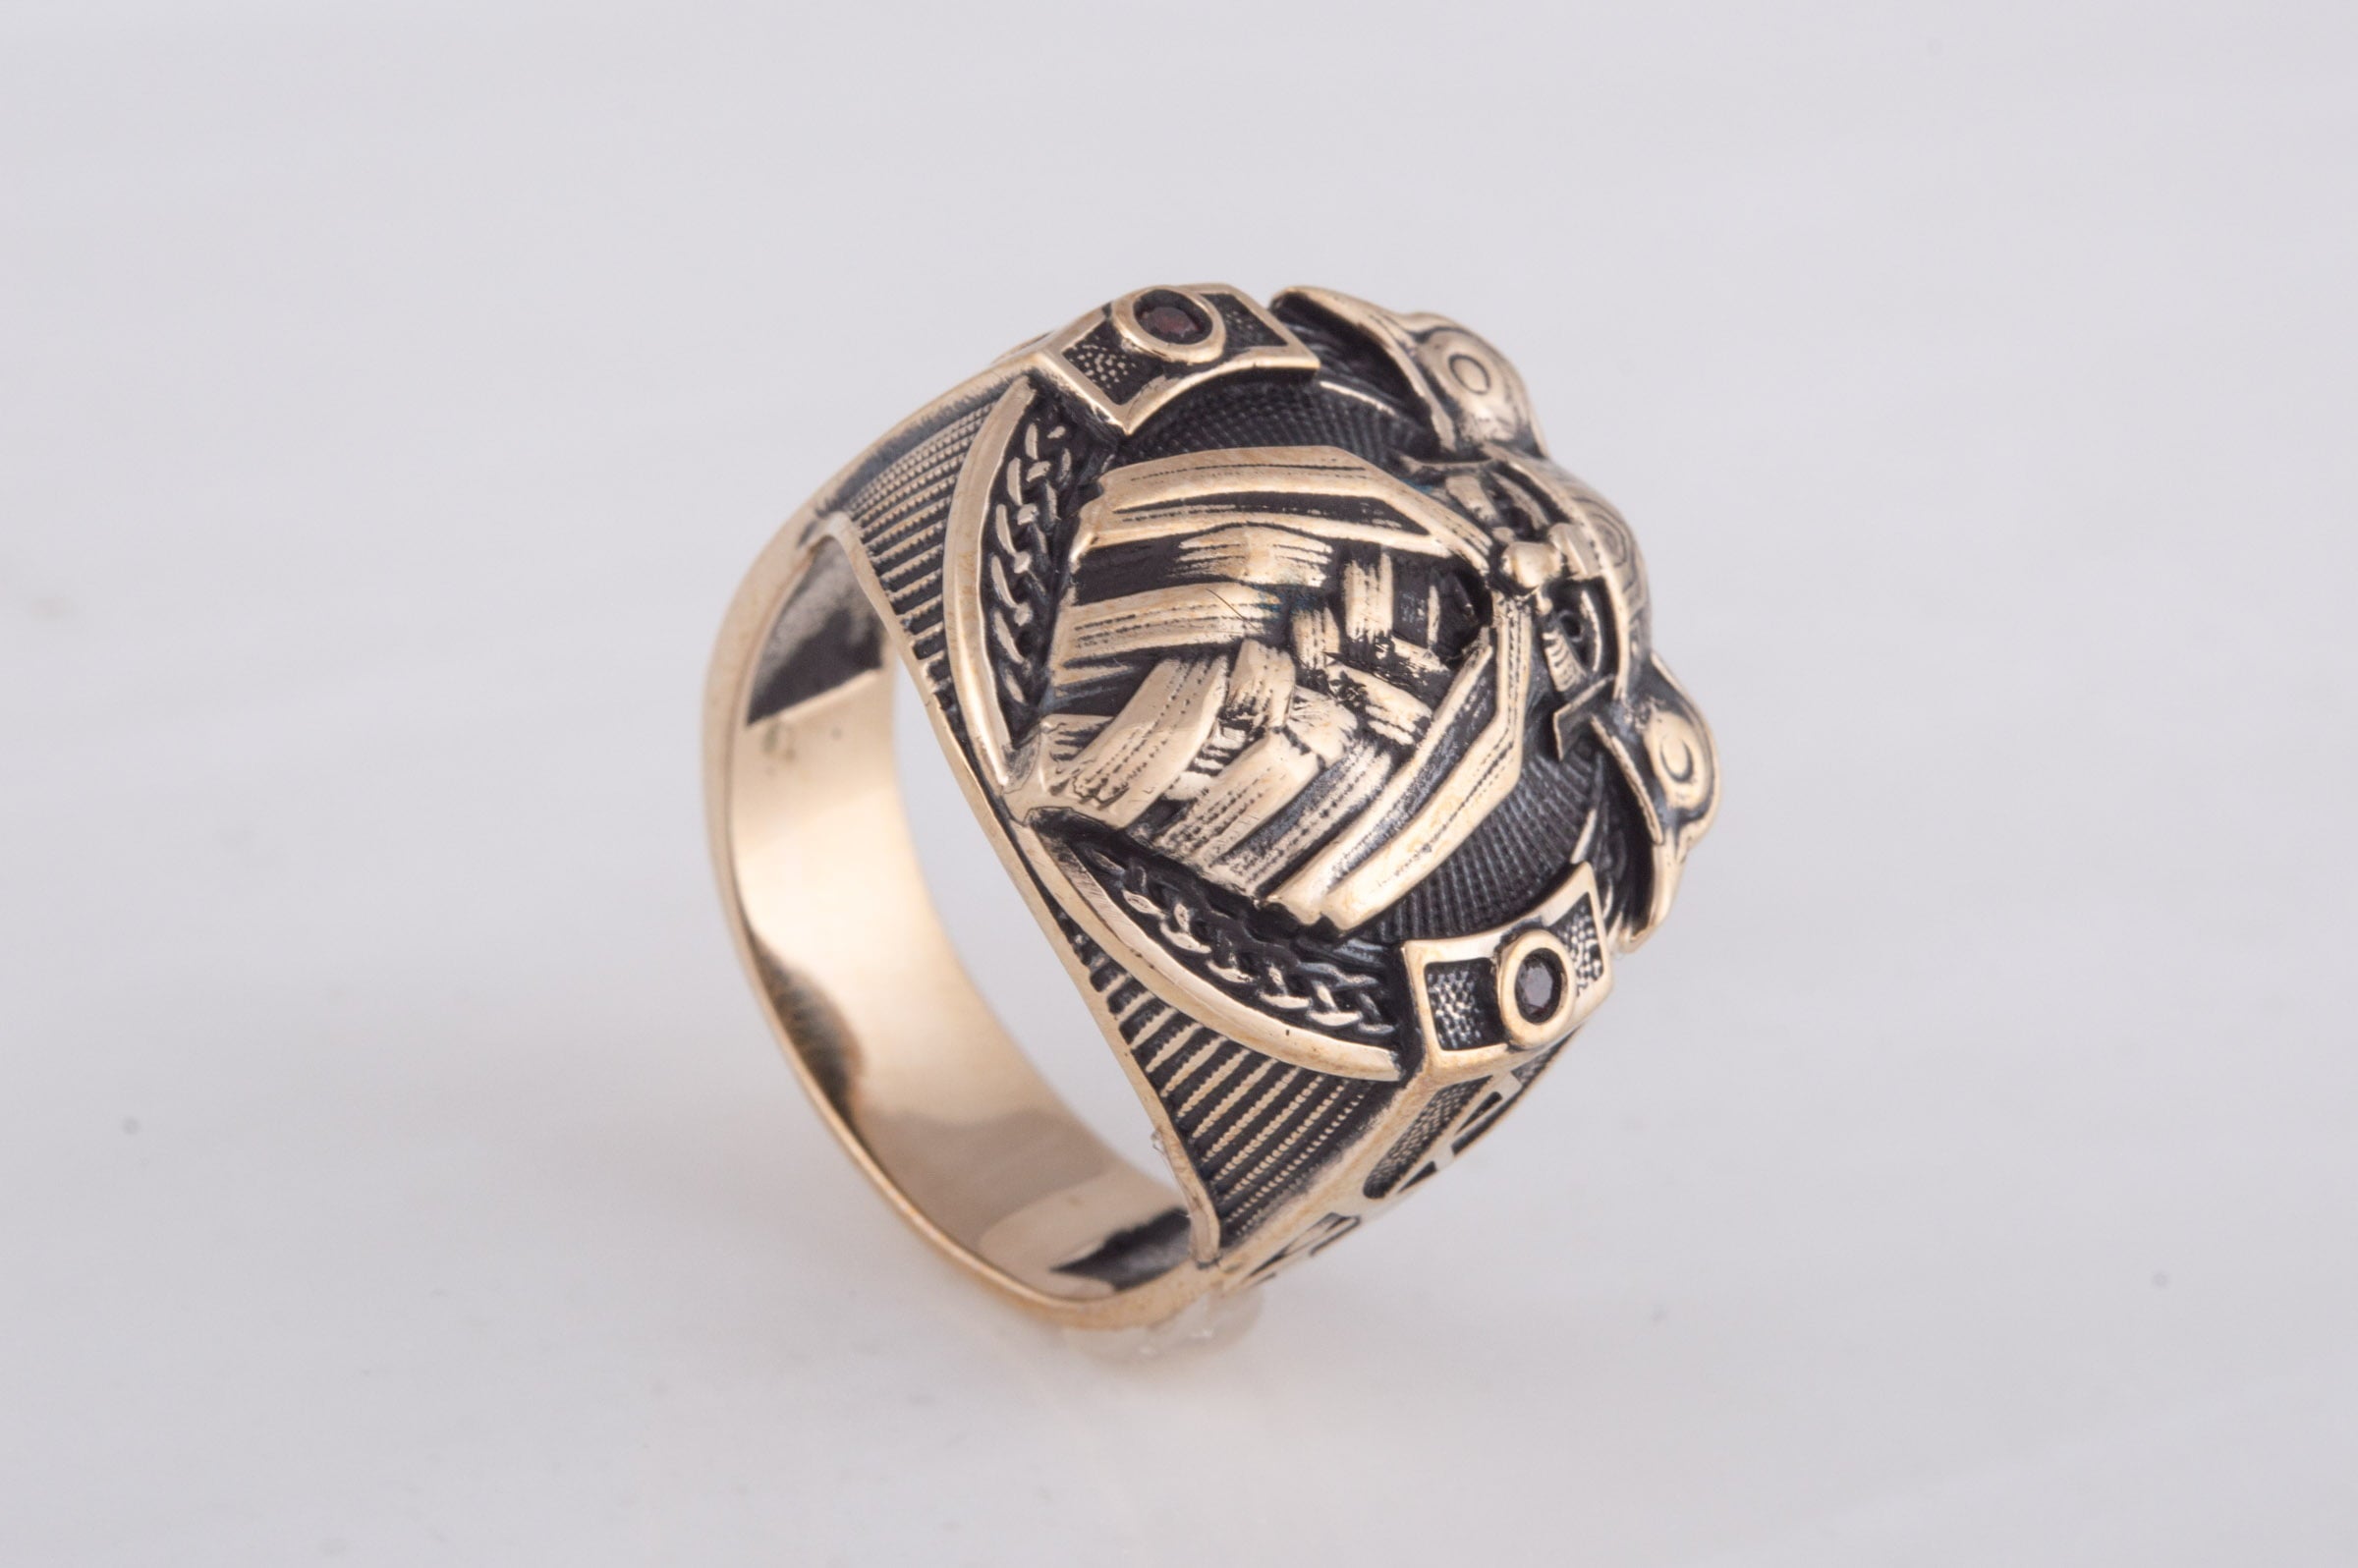 Ring with Odin and Raven Bronze Handcrafted Jewelry - vikingworkshop